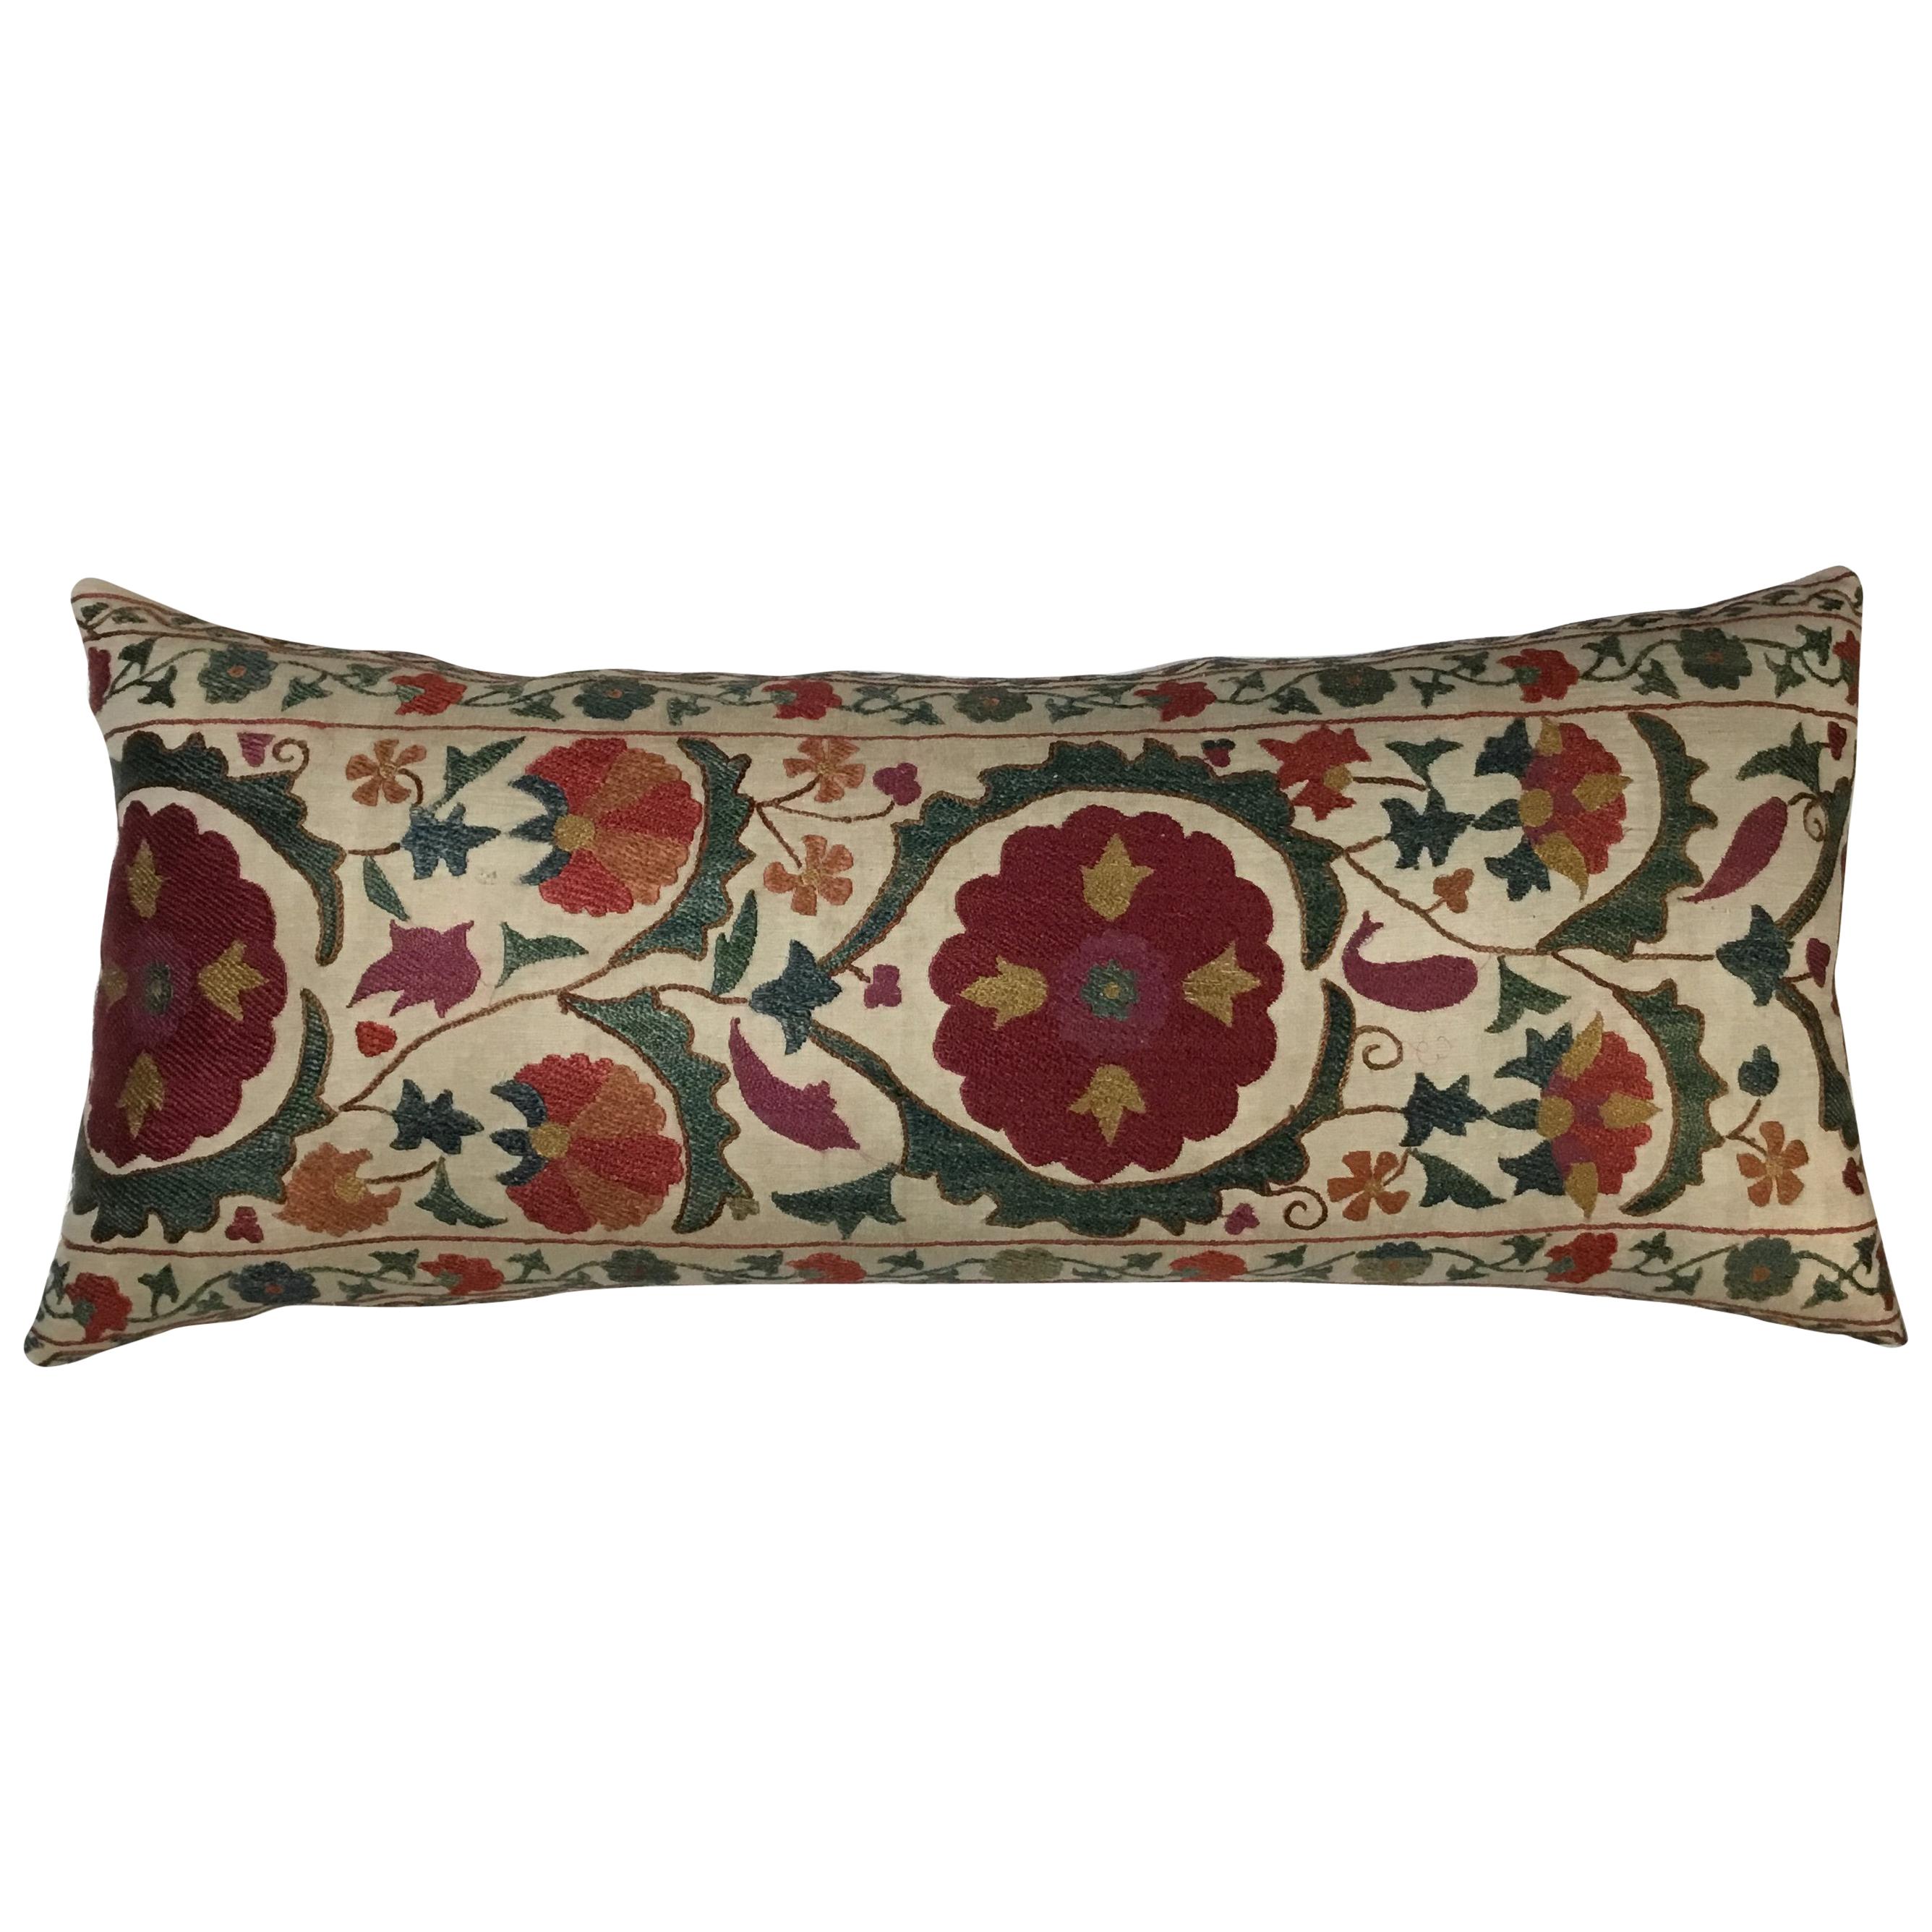 Hand Embroidered Suzani Pillow